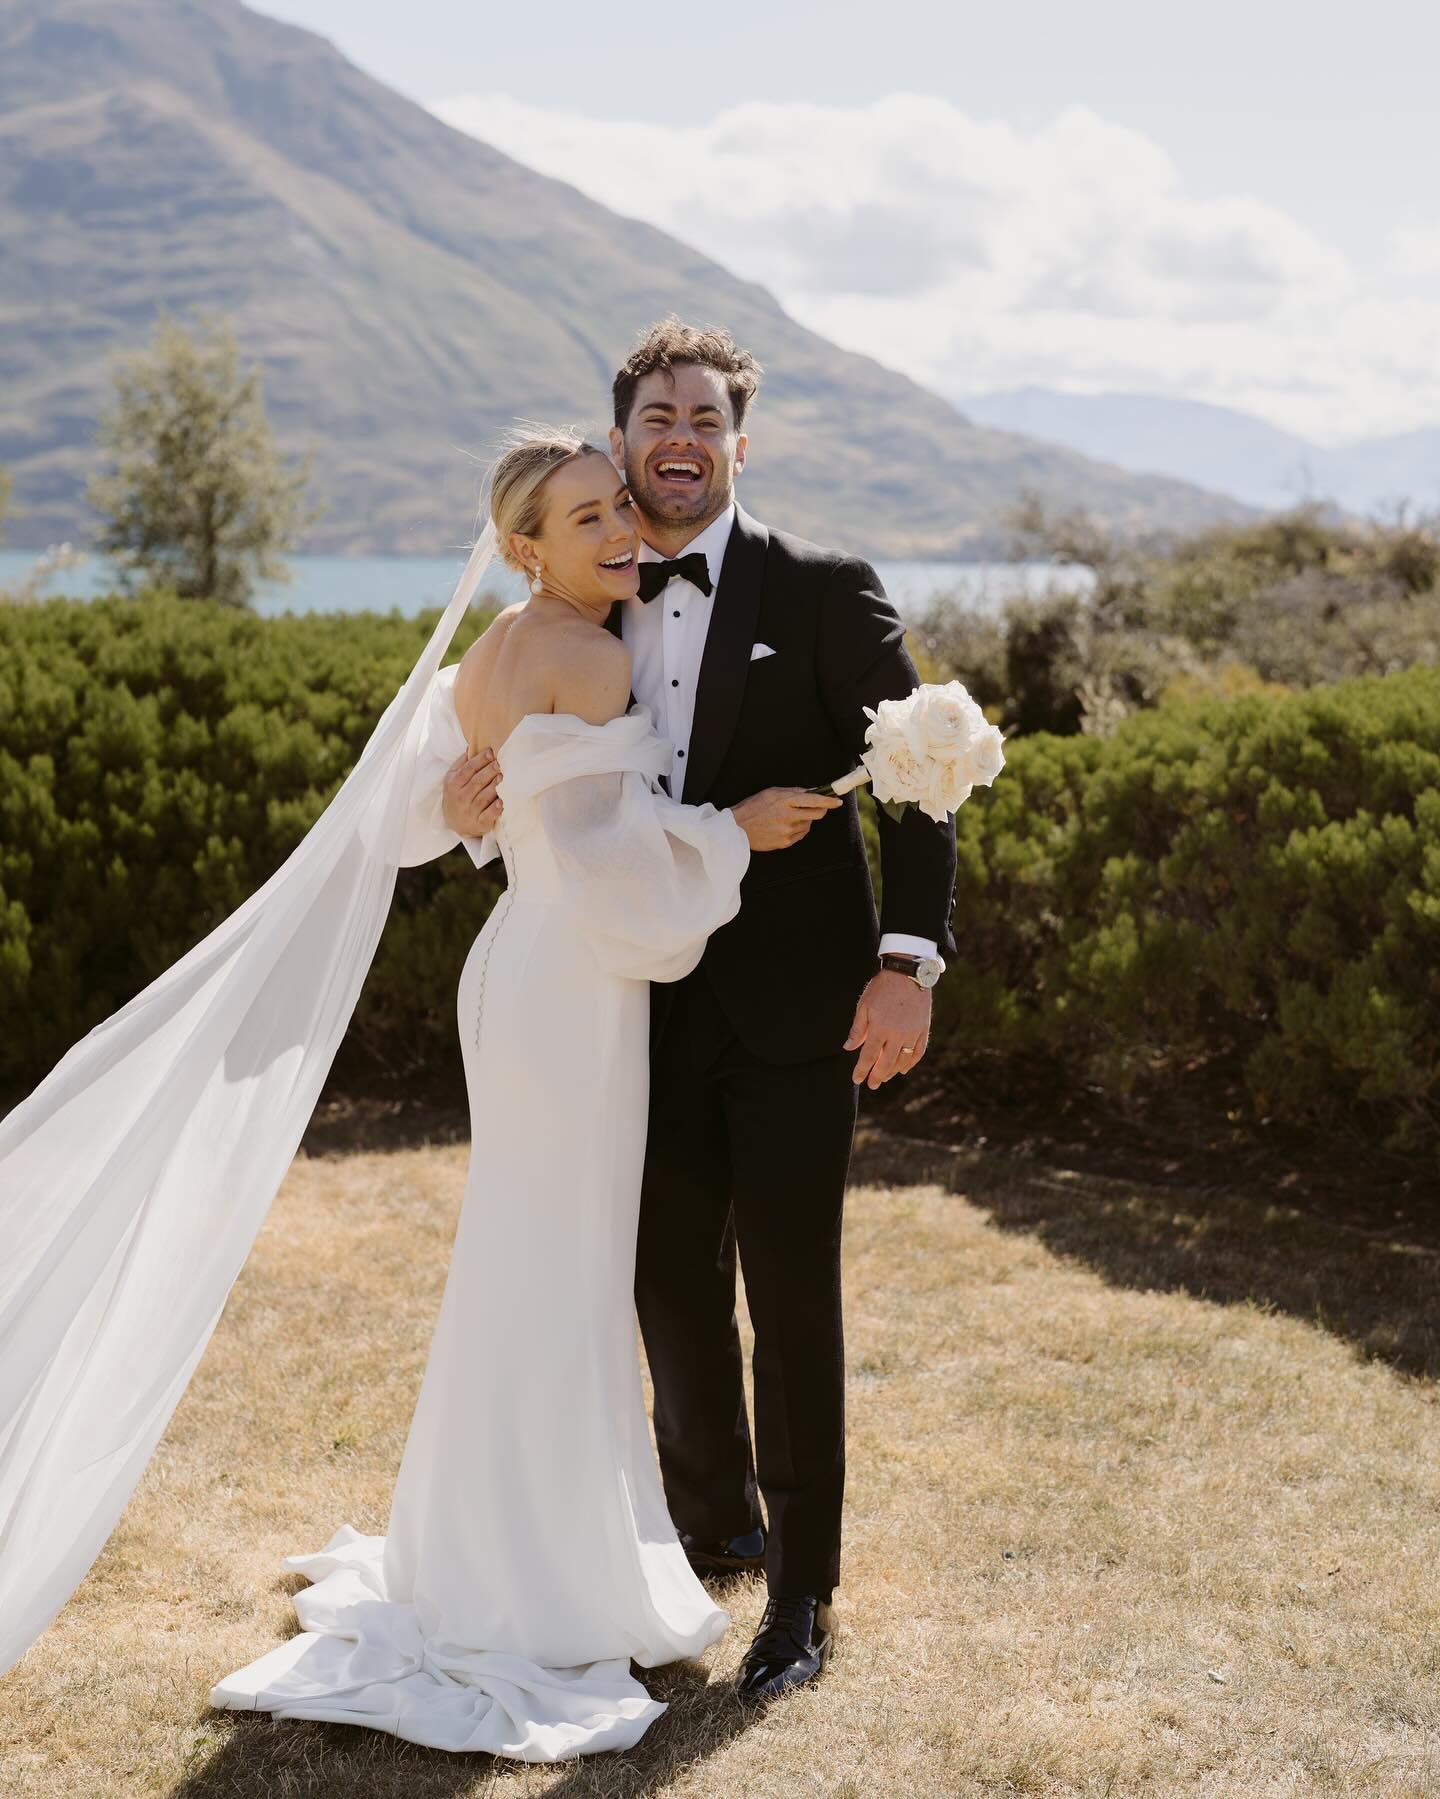 Those infectious freshly married smiles. Brydie + James married in a stunning Jacks Point garden ceremony followed by an epic central Queenstown reception.. best of both worlds.

Imagery @katerobergephotography